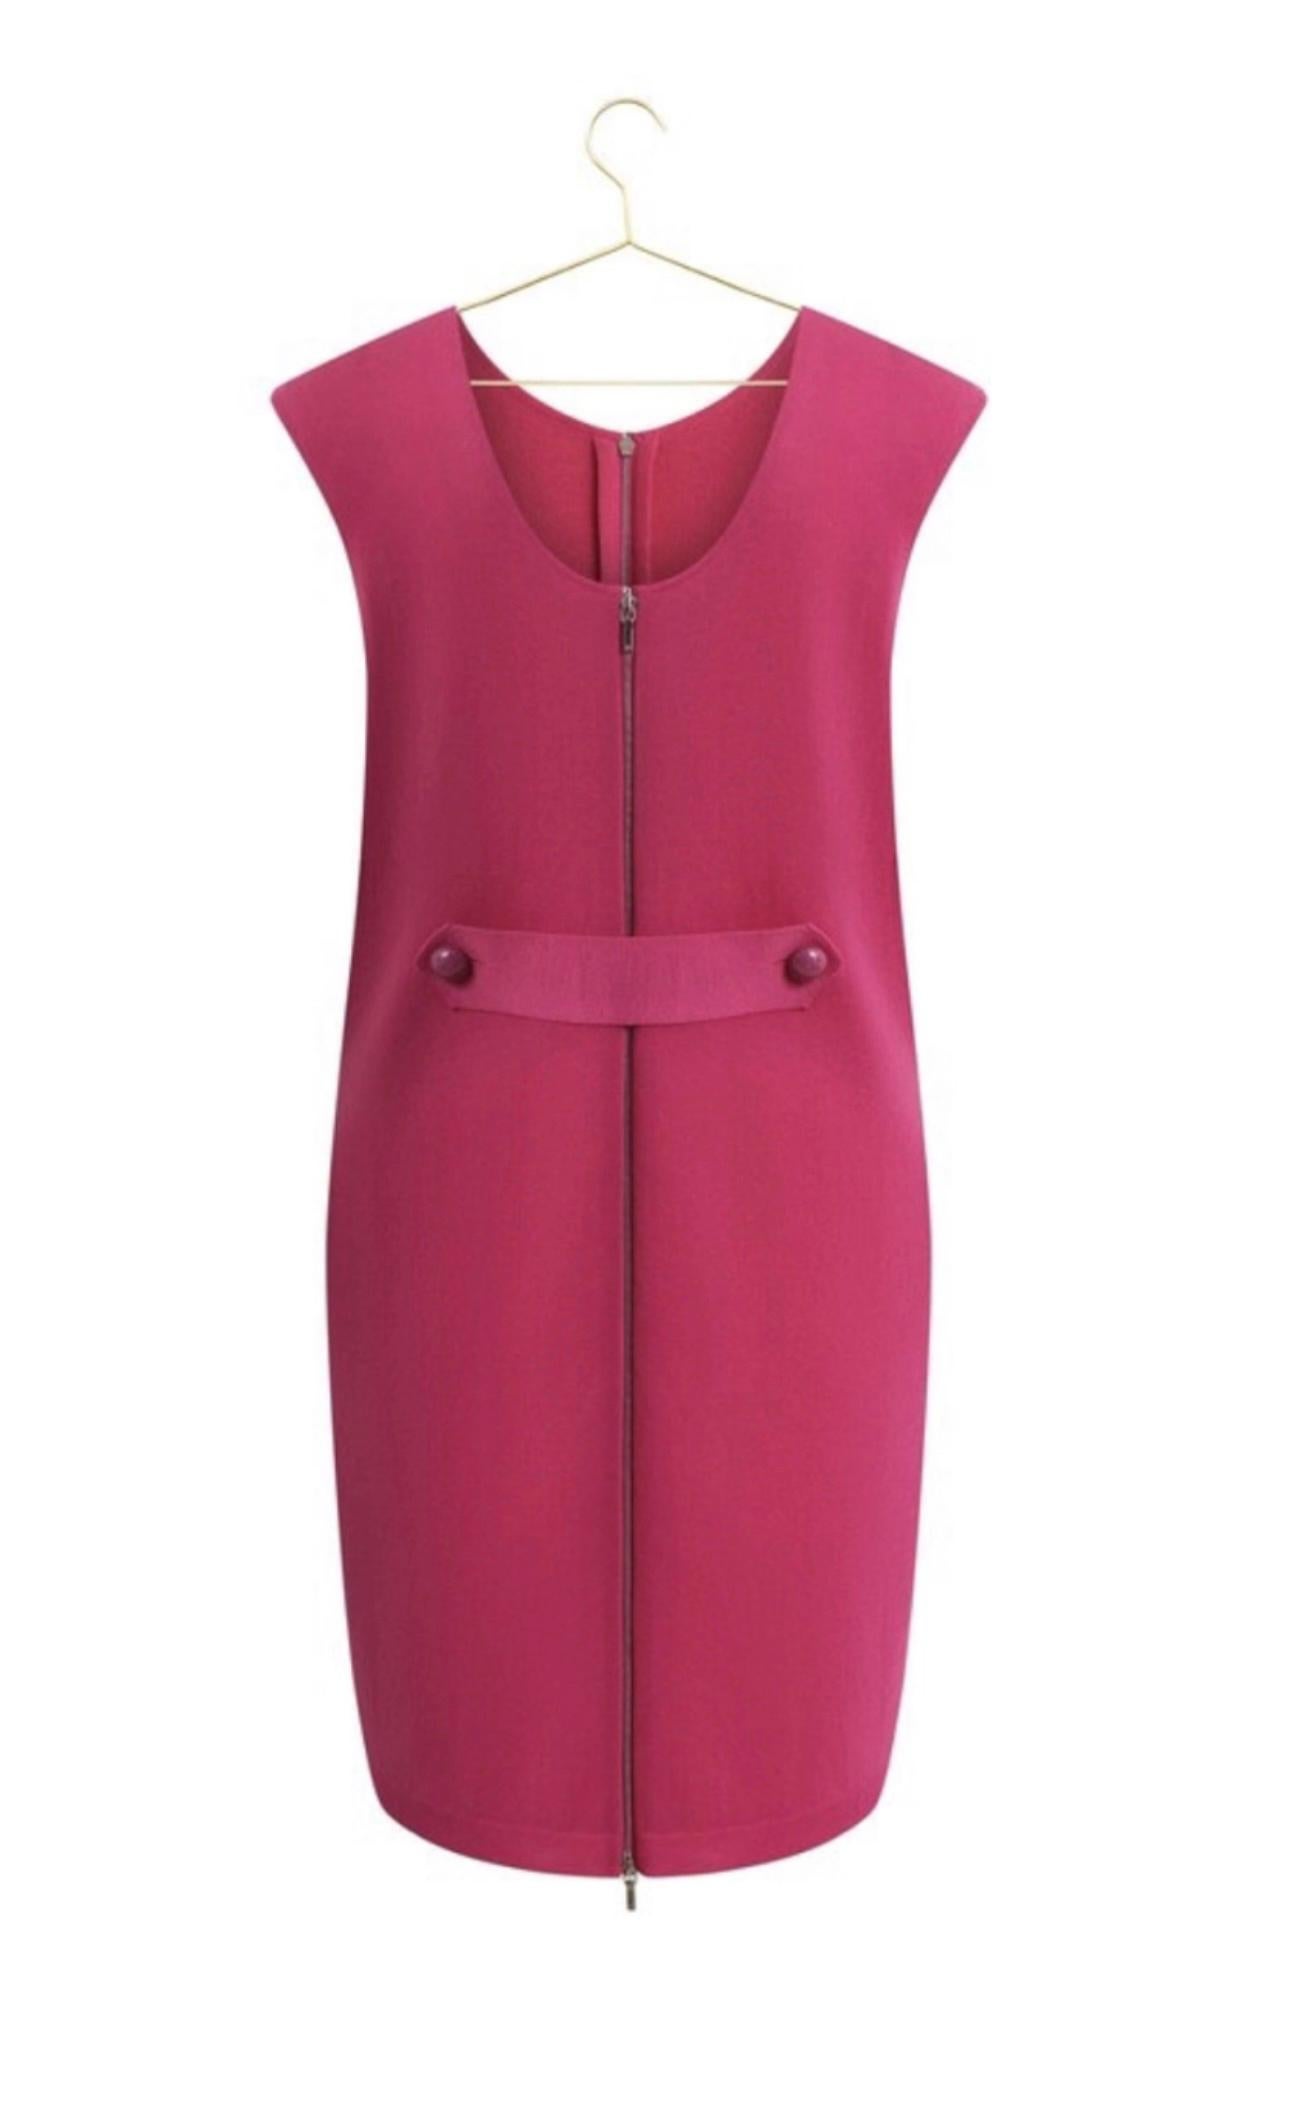 Women's or Men's Chanel Stylish Fuchsia Dress with CC Buttons For Sale